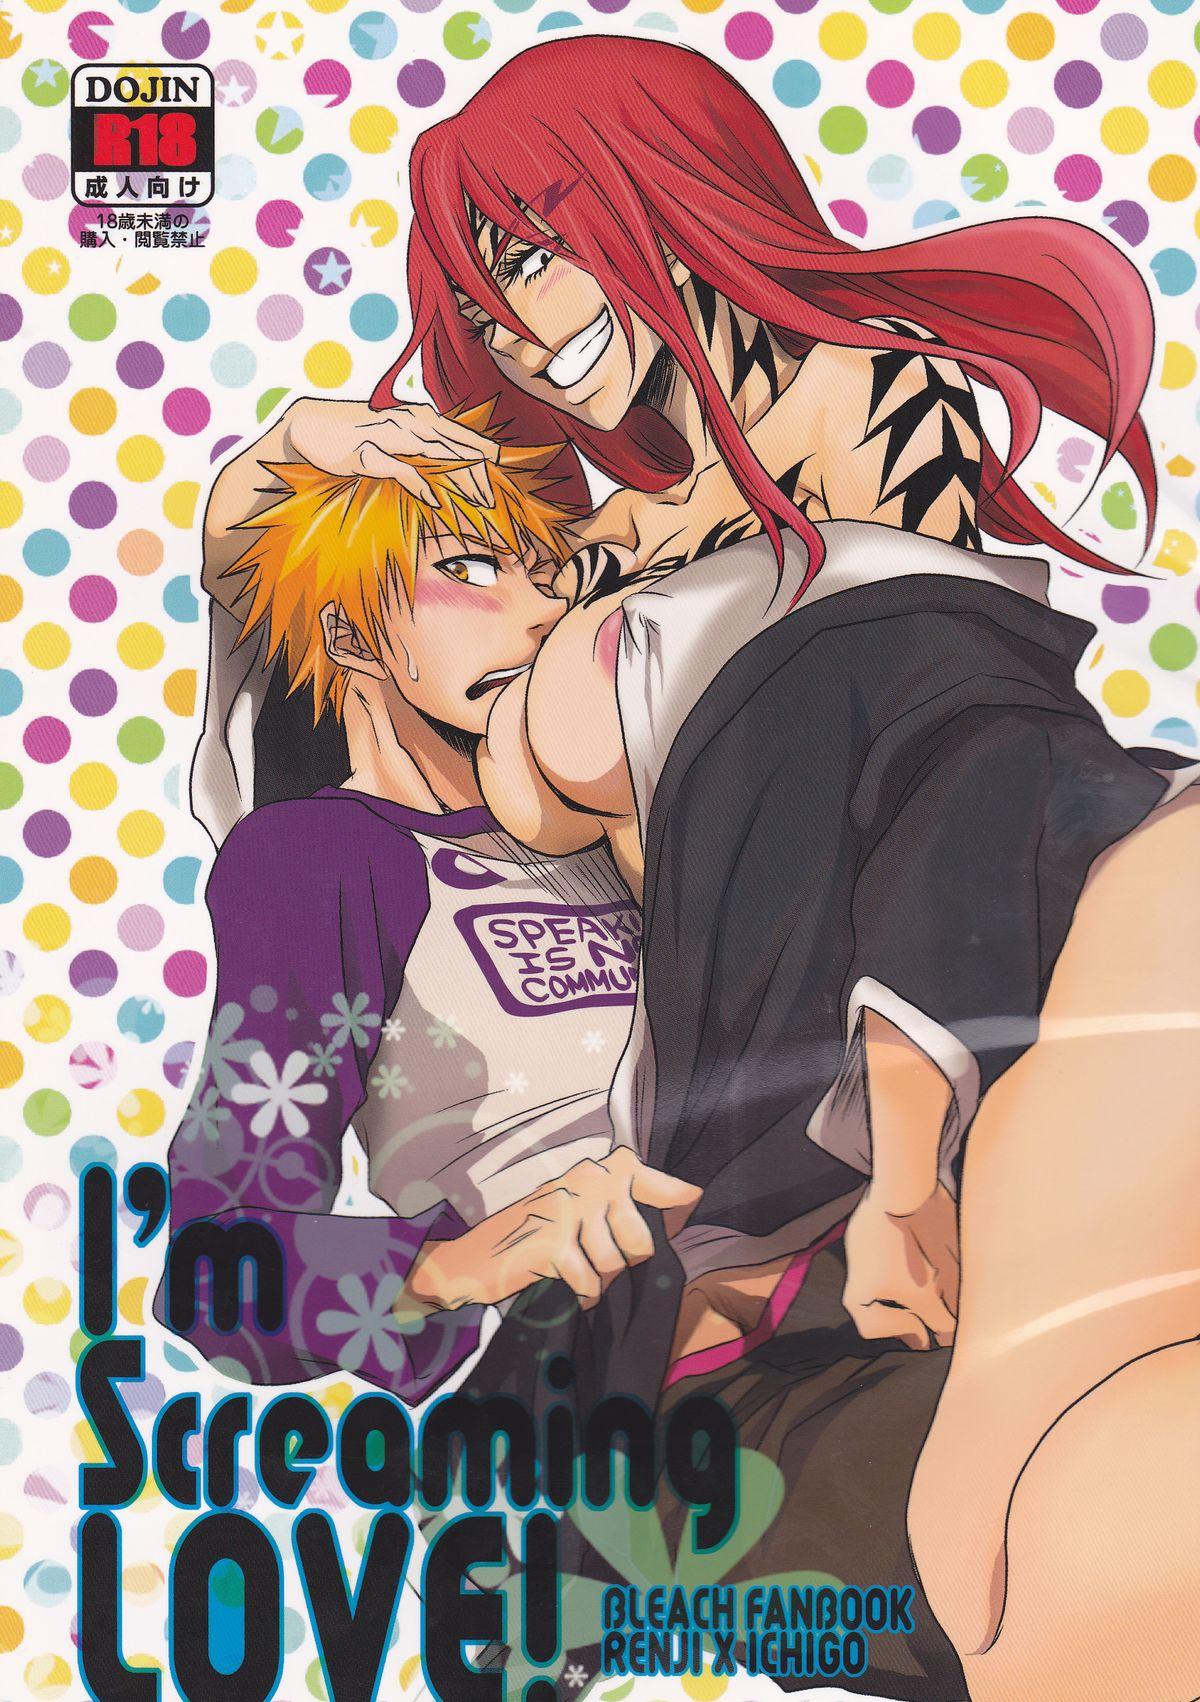 Pretty I'm Screaming LOVE! - Bleach Amateurs Gone Wild - Page 1